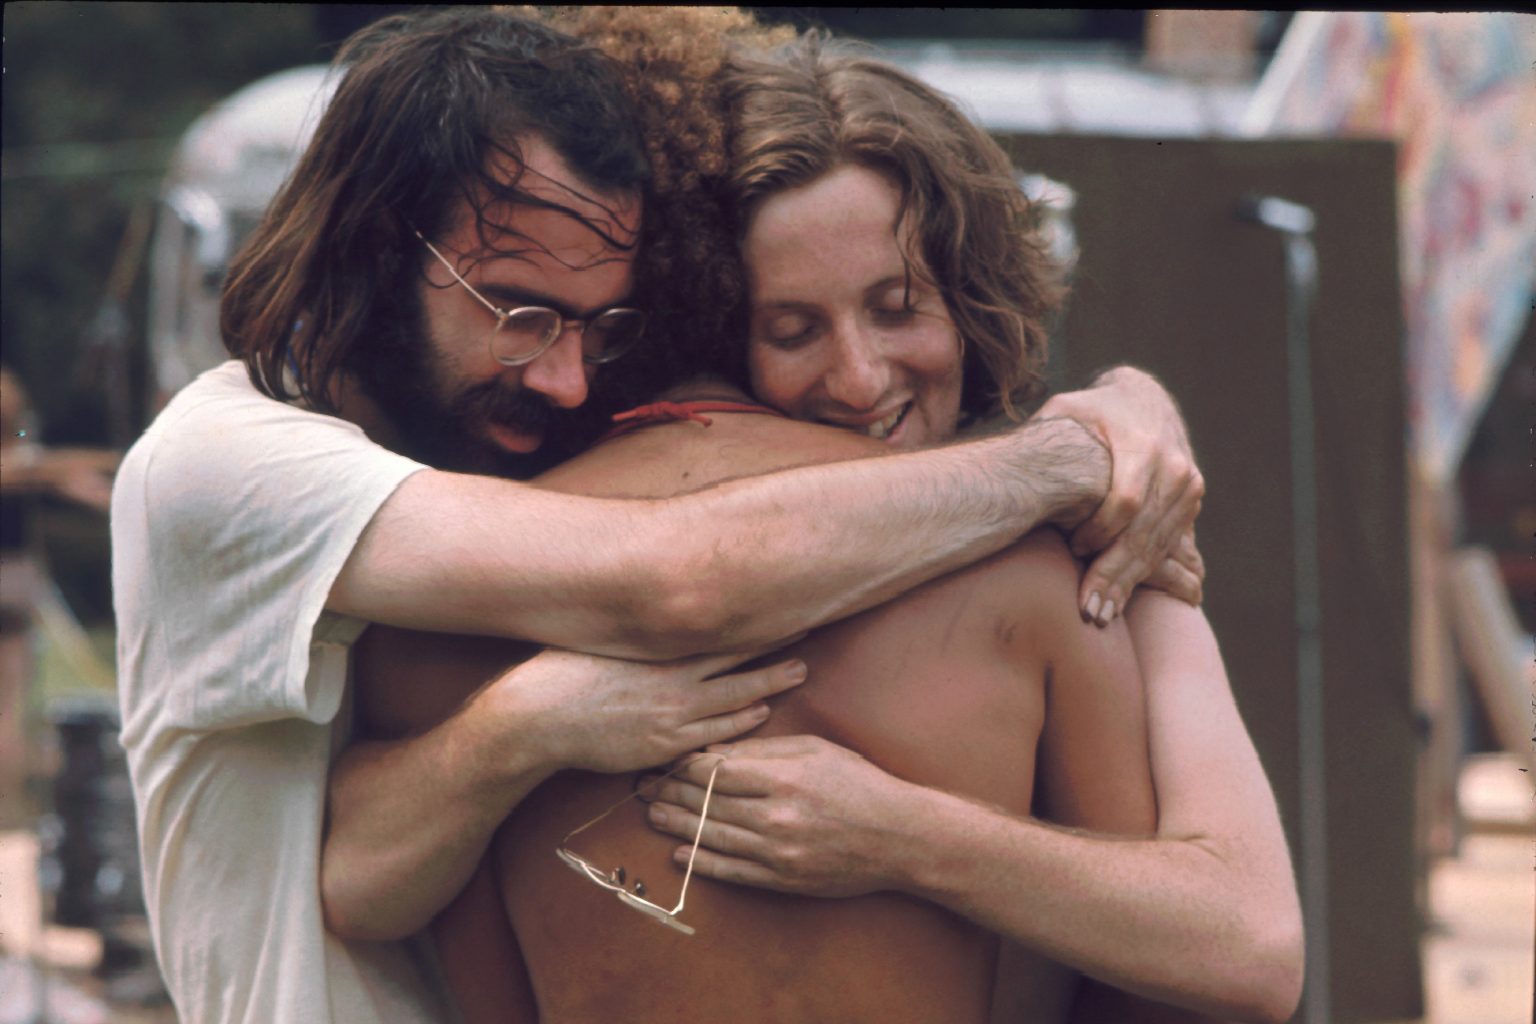 Three men attending the Woodstock music festival hug each other, Bethel, NY, August 1969. (Photo by Ralph Ackerman/Getty Images)